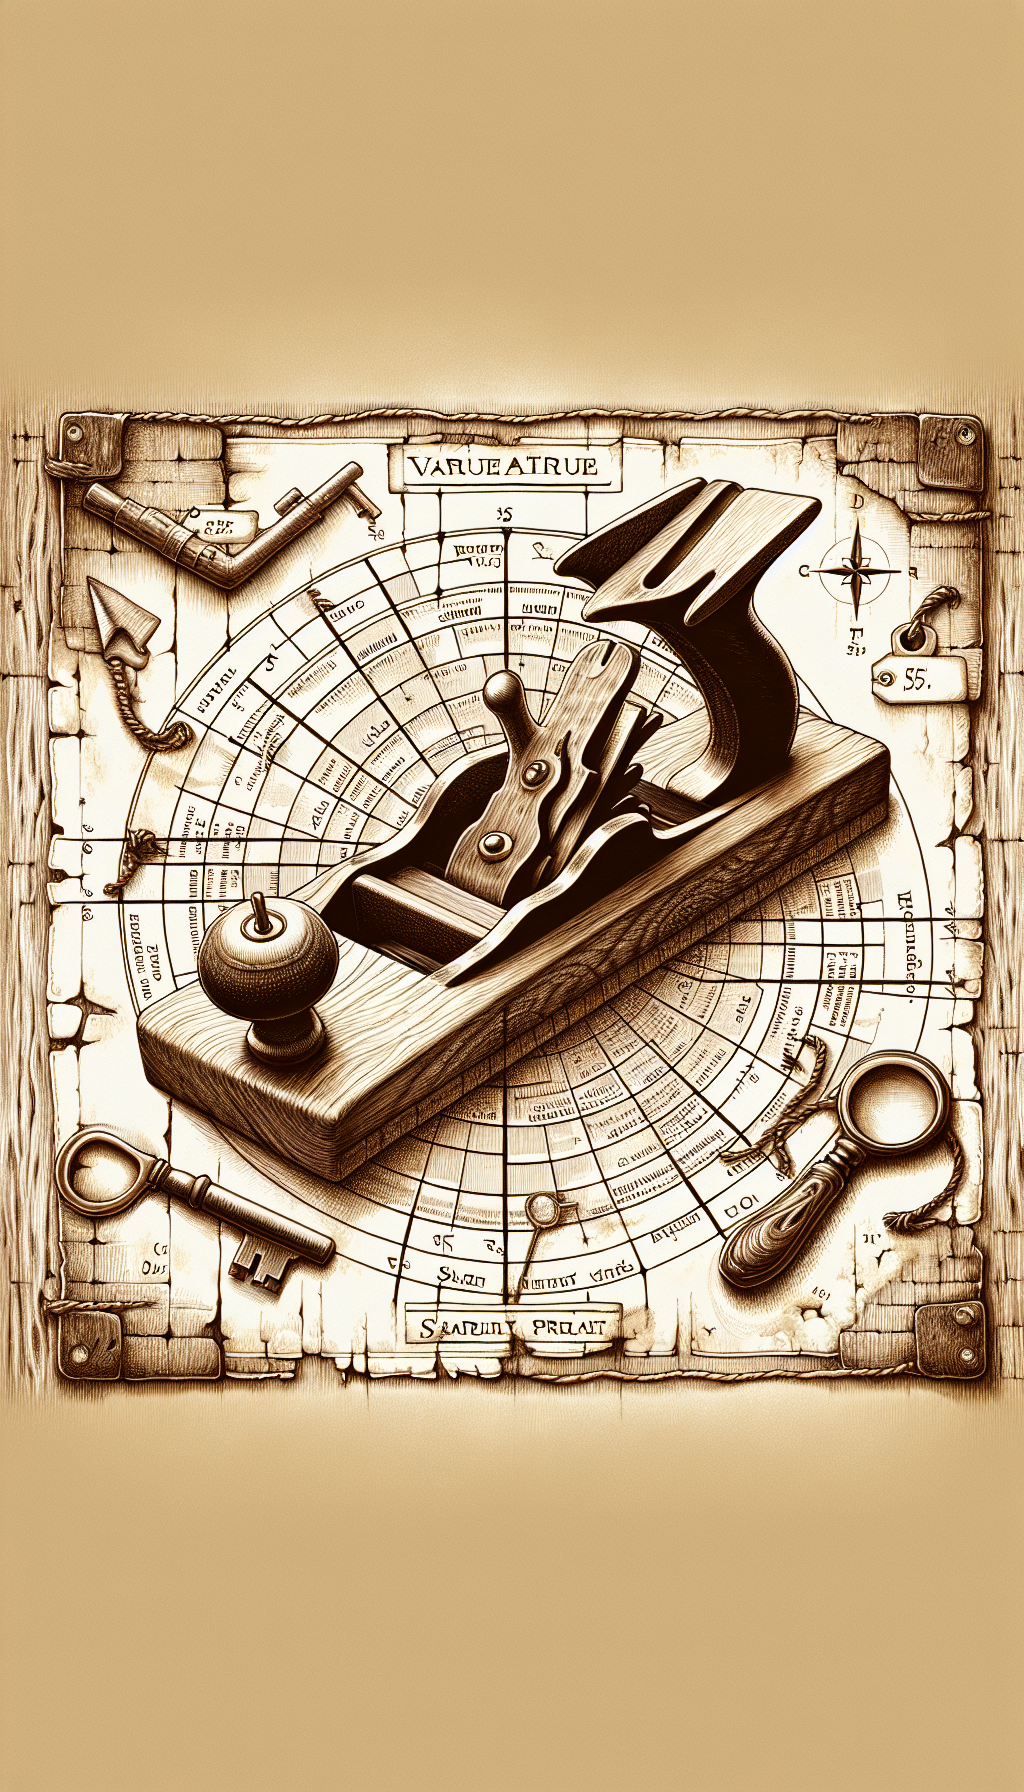 A sepia-toned sketch depicts an ancient wood plane resting atop an aged treasure map, with magnifying glass and key overlaying intricate engravings of the plane. The map features key aspects determining value, leading to a shimmering 'X' where rarity and age intersect. Whimsical price tags dangle from the handle, playfully suggesting the plane’s worth.